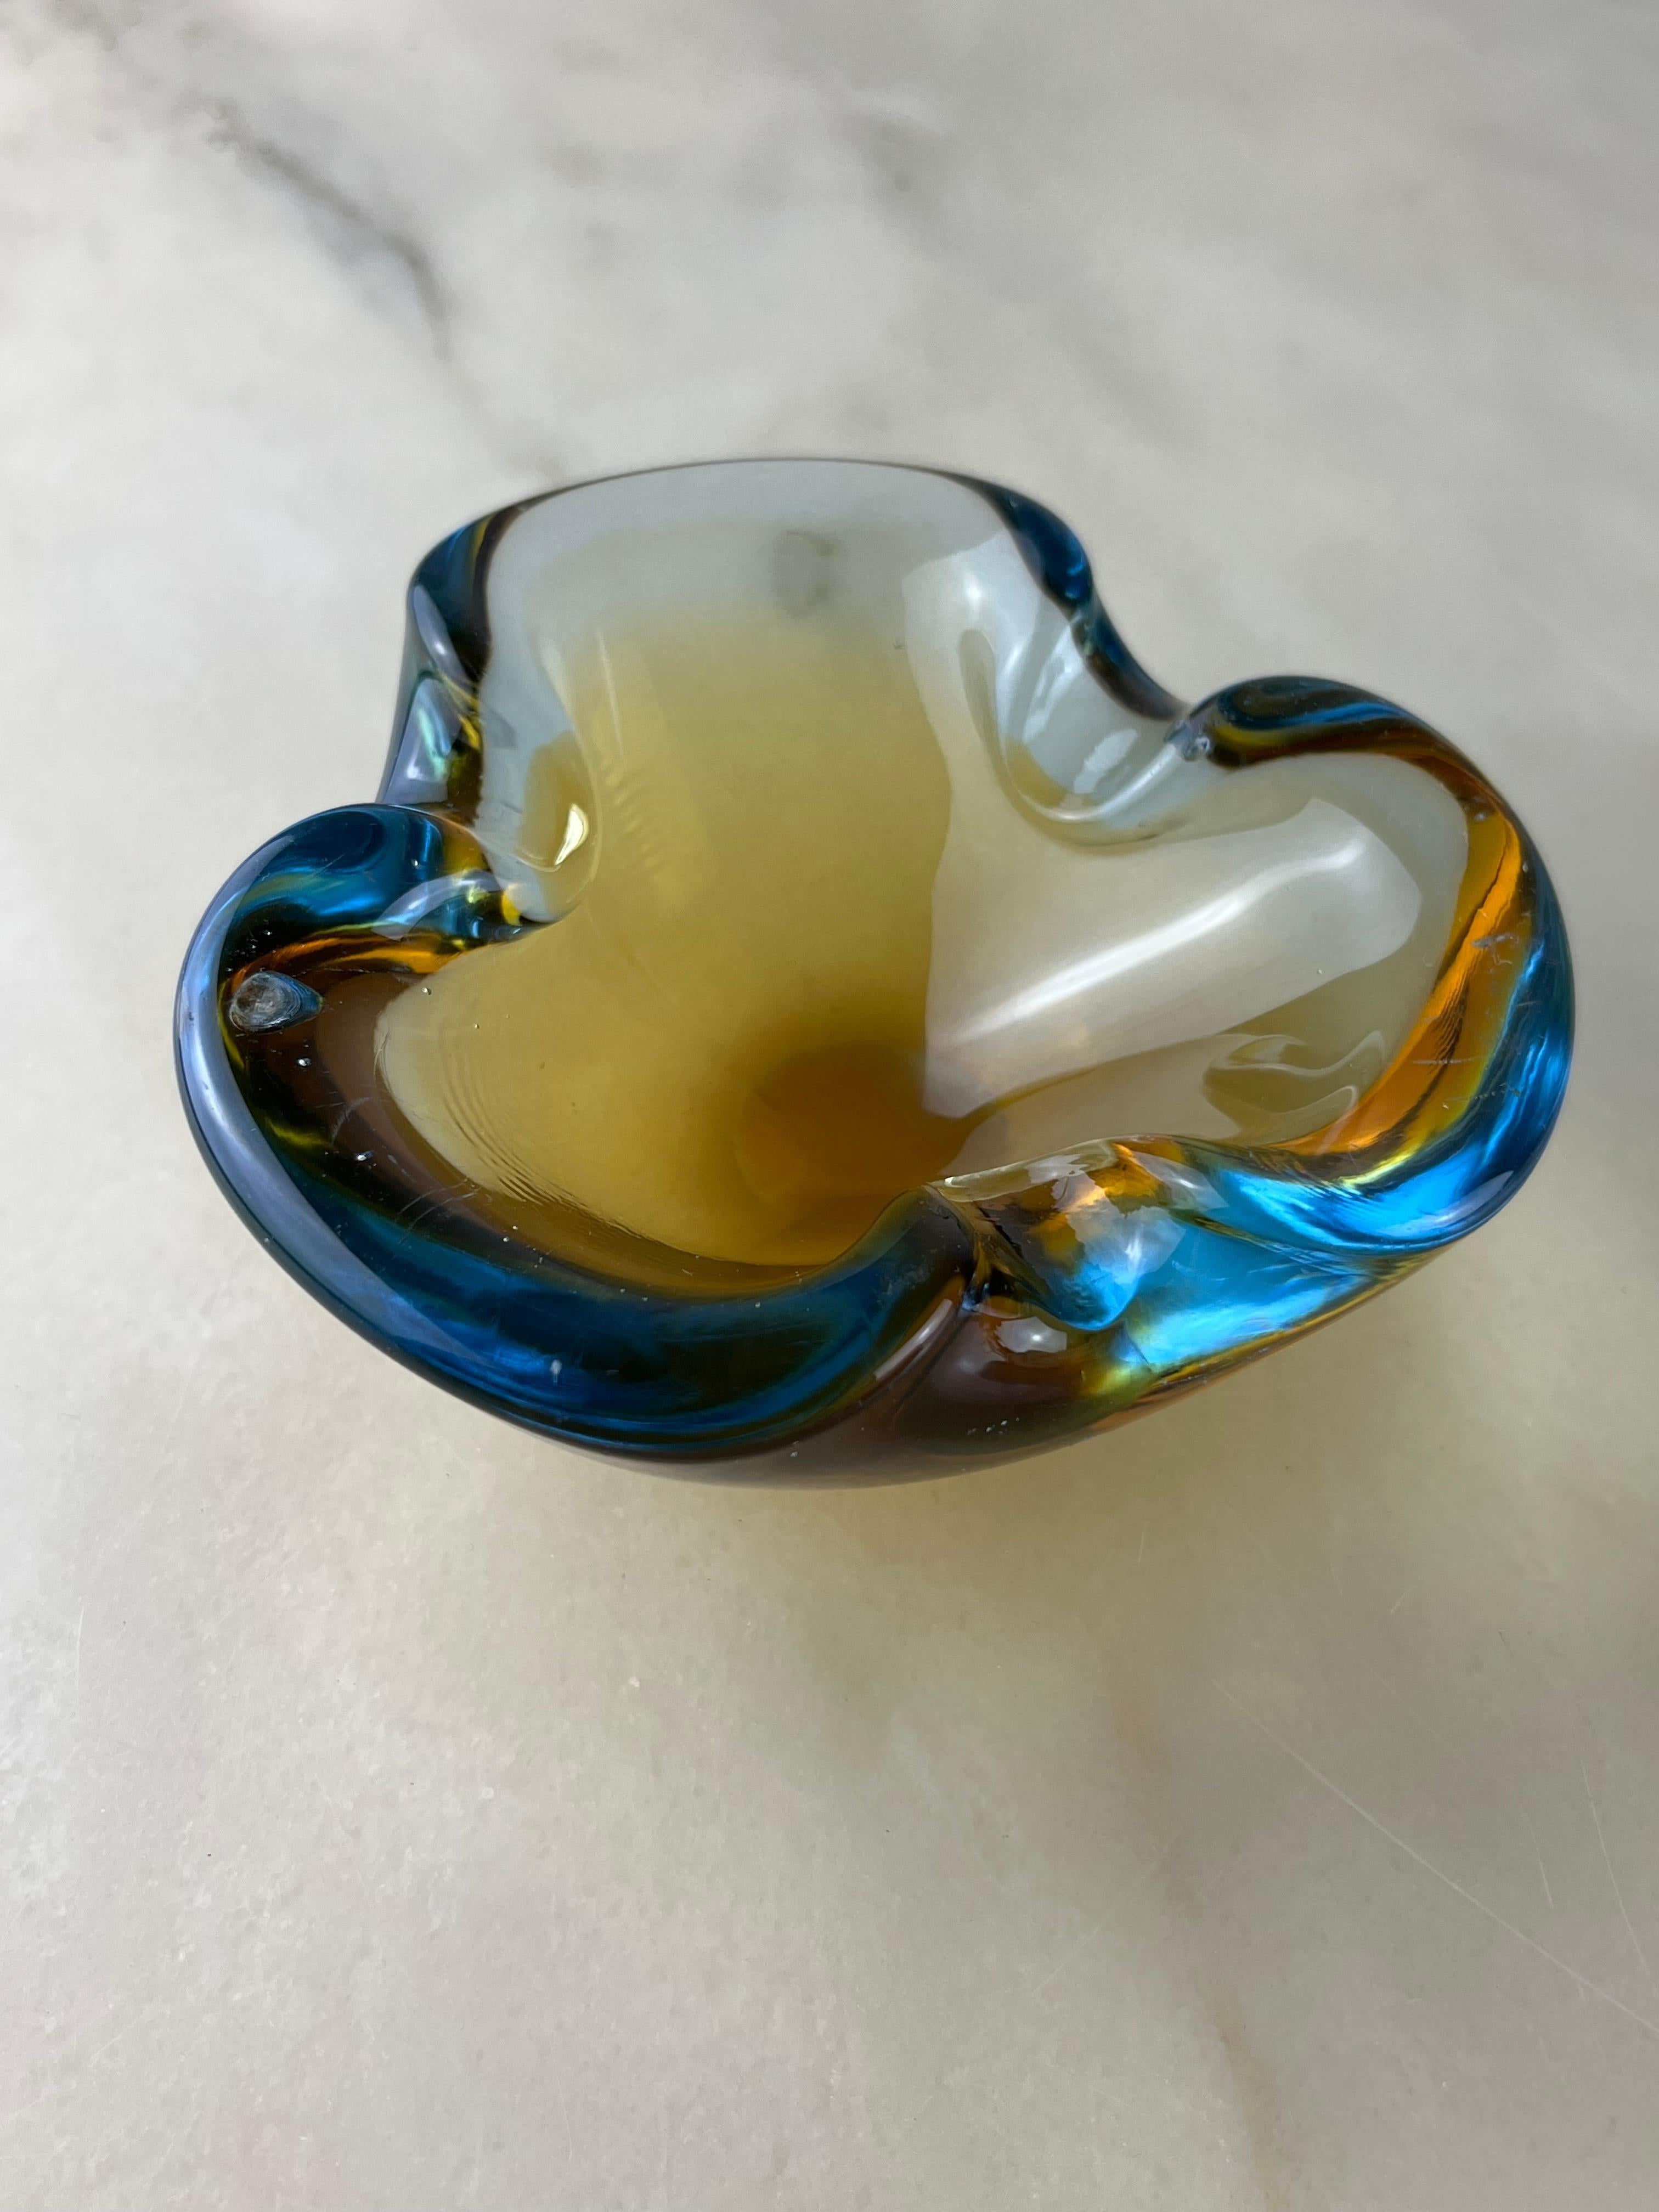 Murano submerged glass ashtray, Italy, 1960s.
Family item, it has small signs of aging and use.